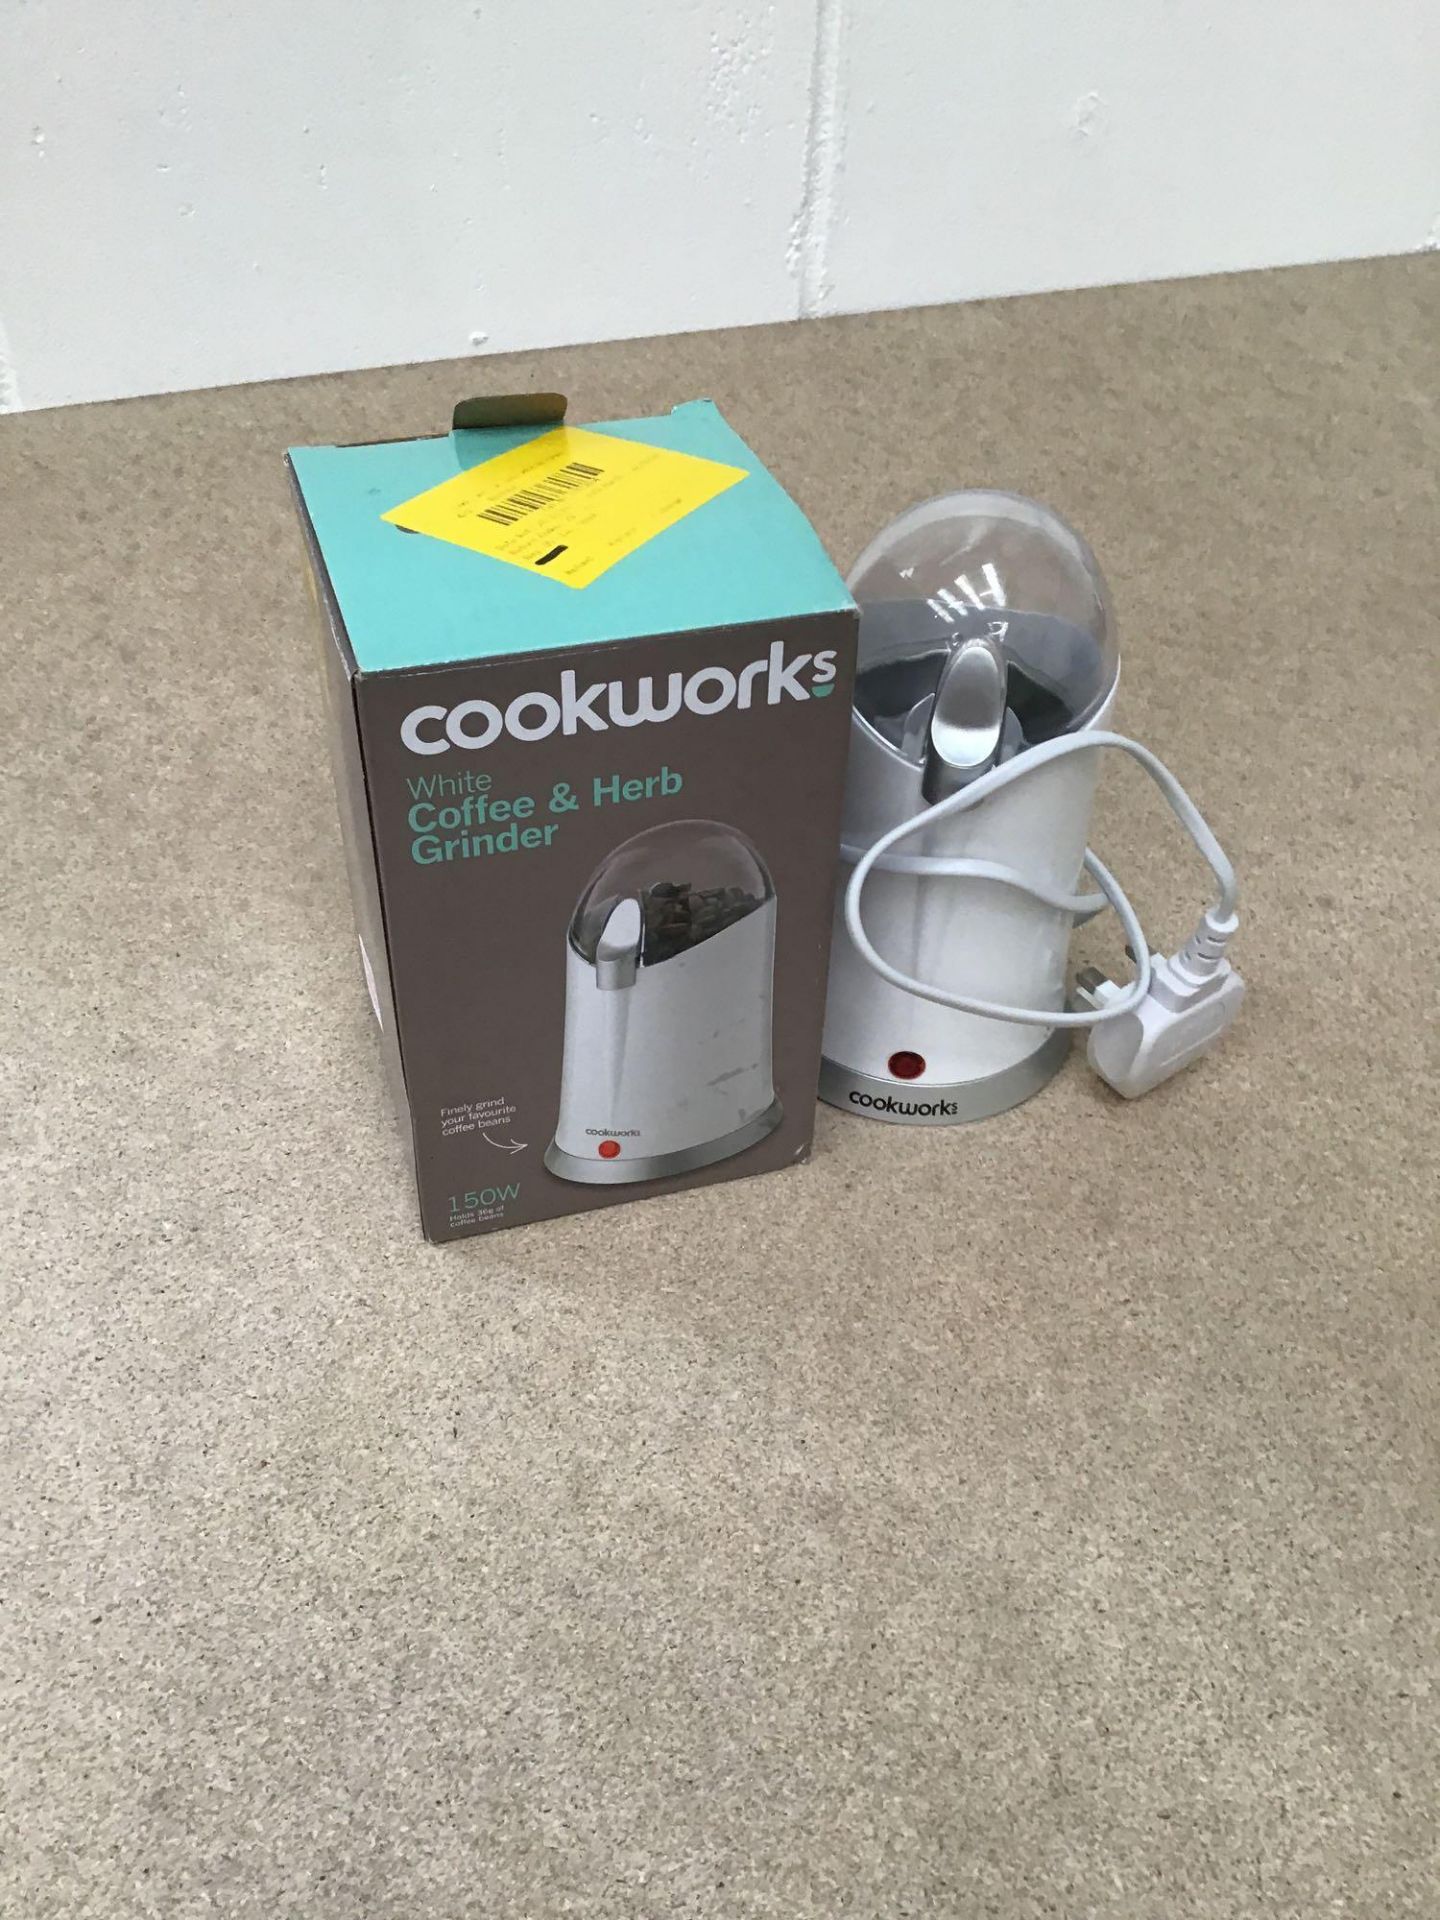 Cookworks Coffee and Herb Grinder - White, £14.99 RRP - Image 3 of 6